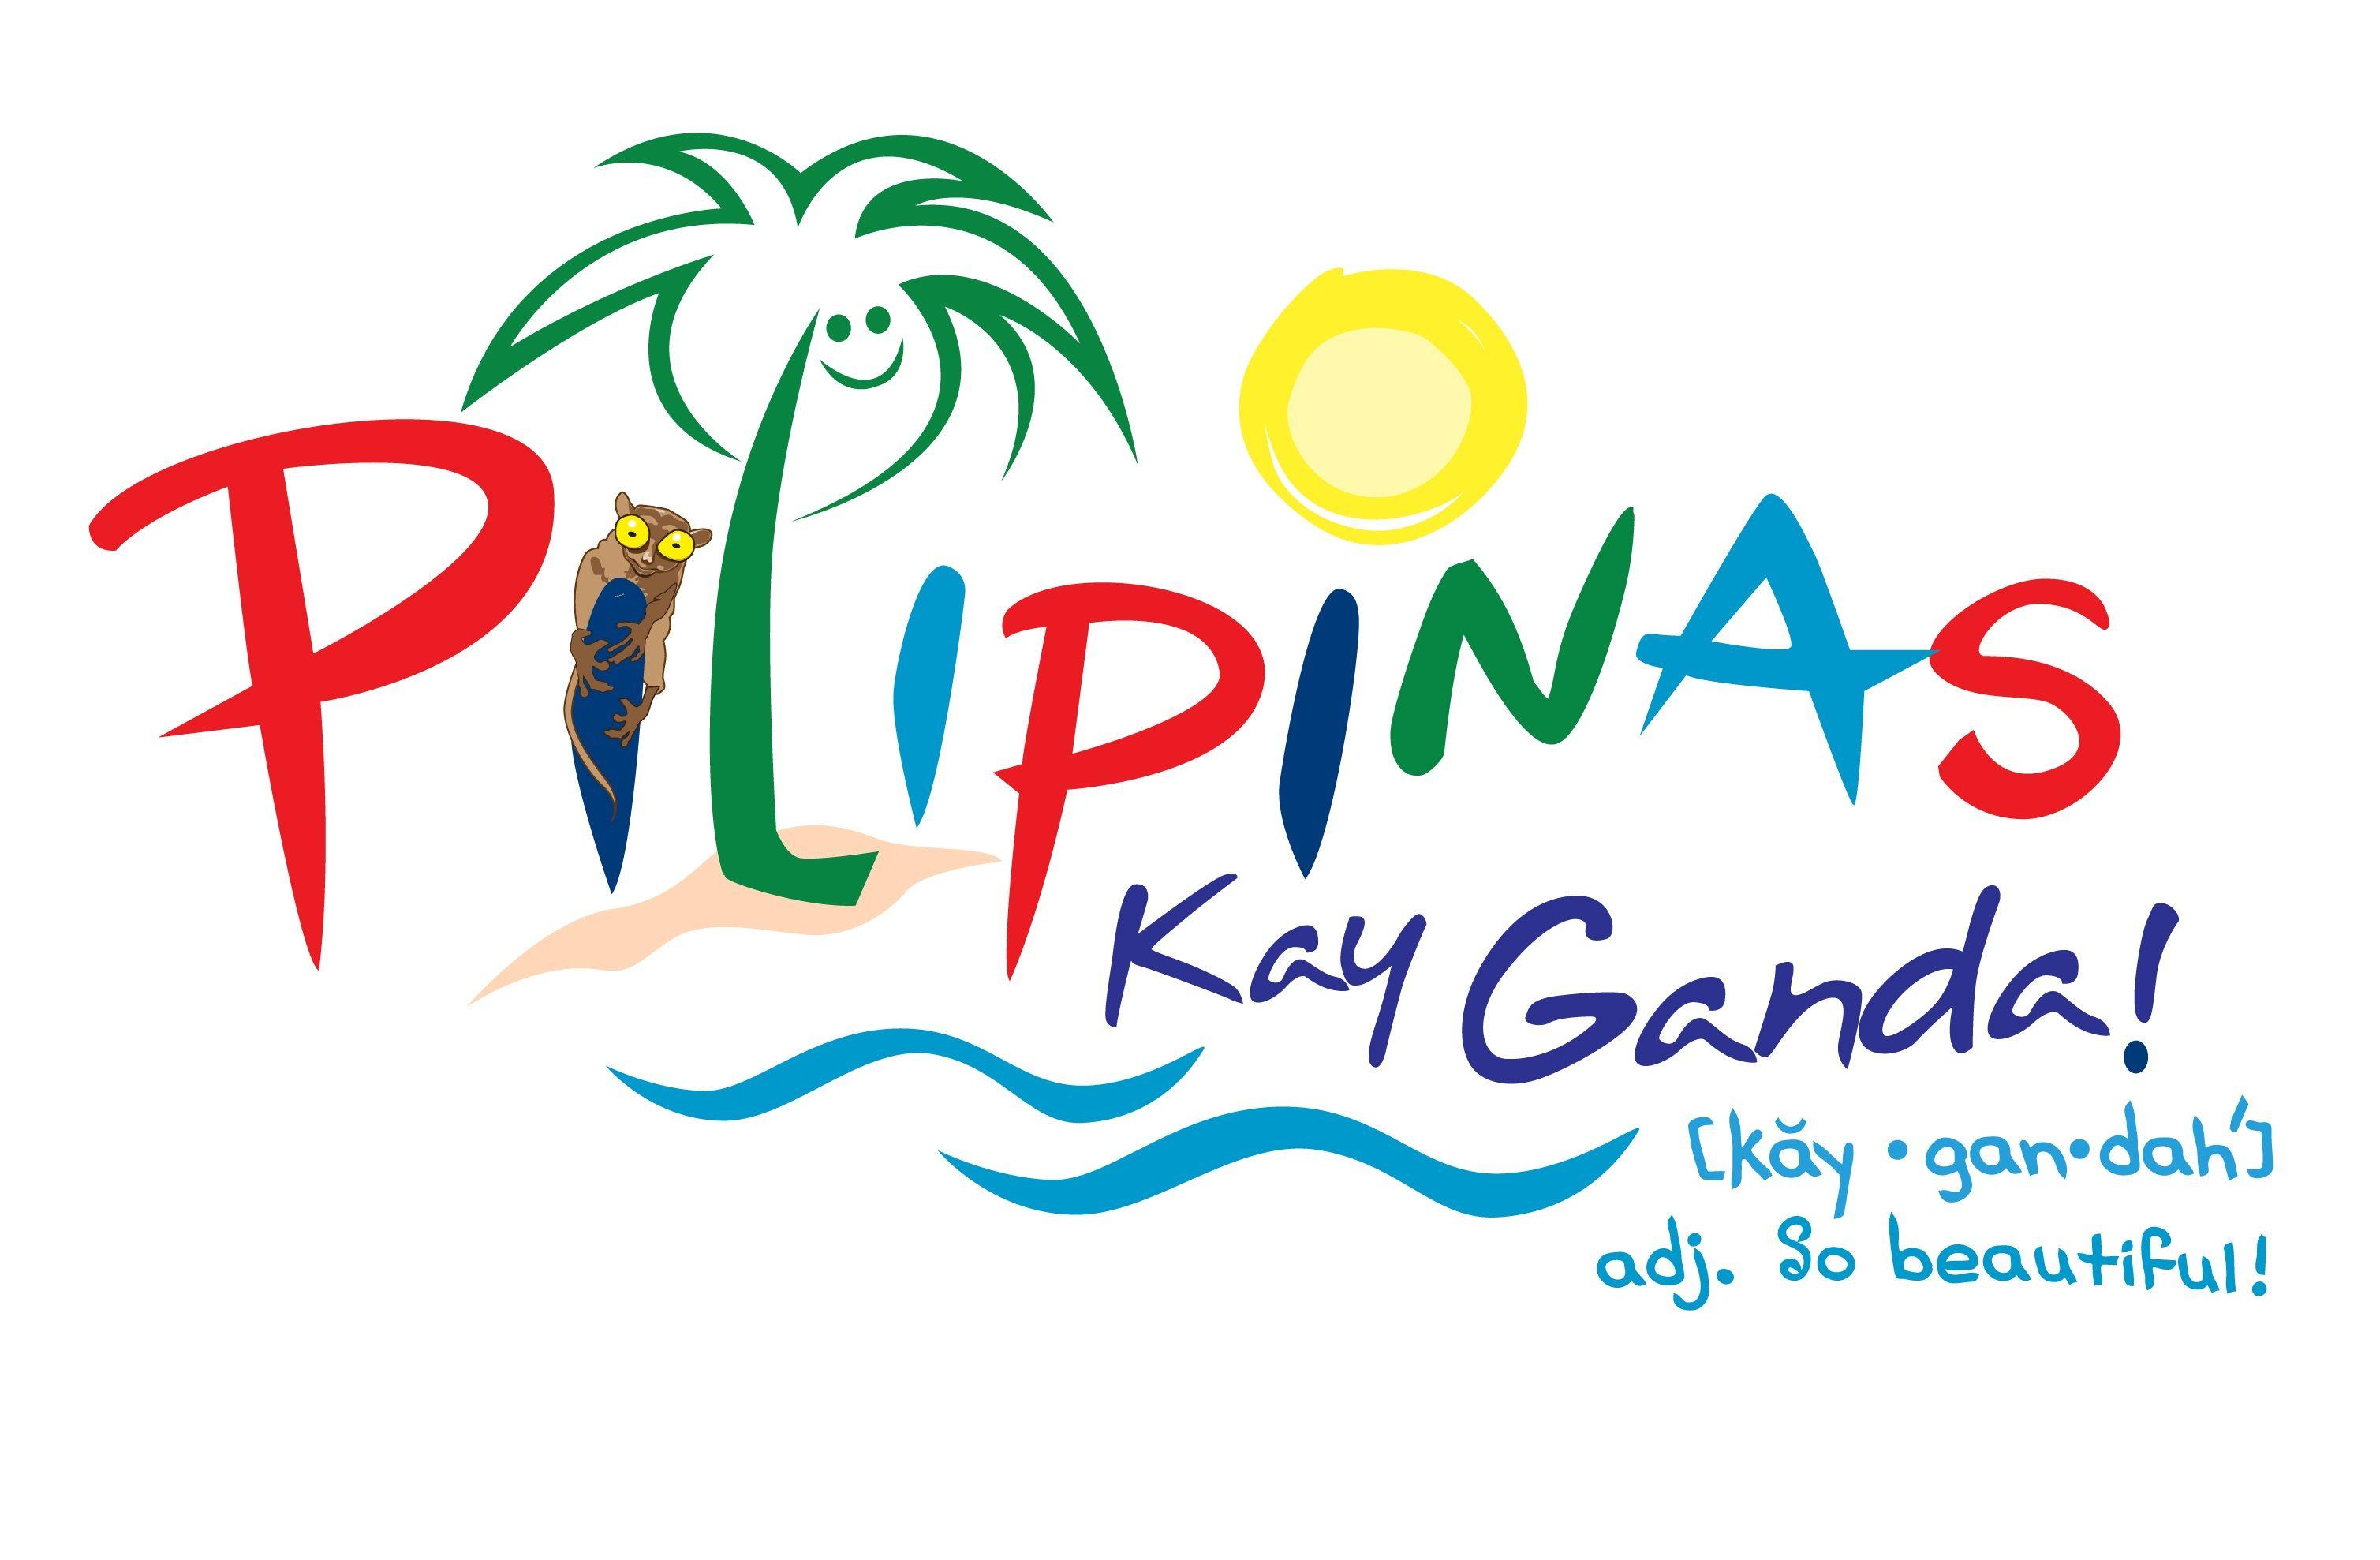 Philippines Logo - Pilipinas Kay Ganda: Philippines New Brand from the Department of ...